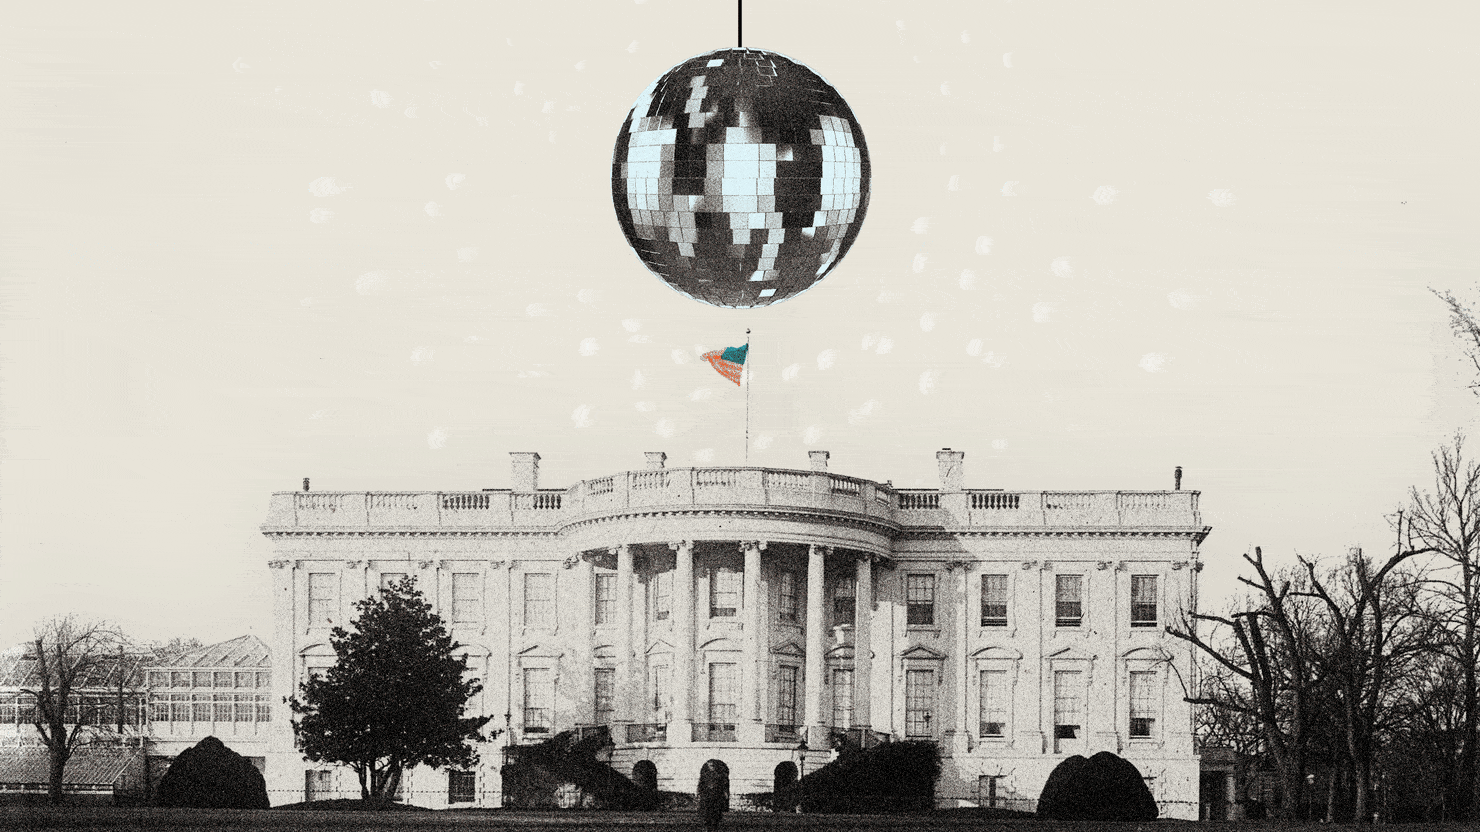 America’s Most Diva President Had Tiffany Decorate the White House with ‘Wrinkled’ Disco Balls